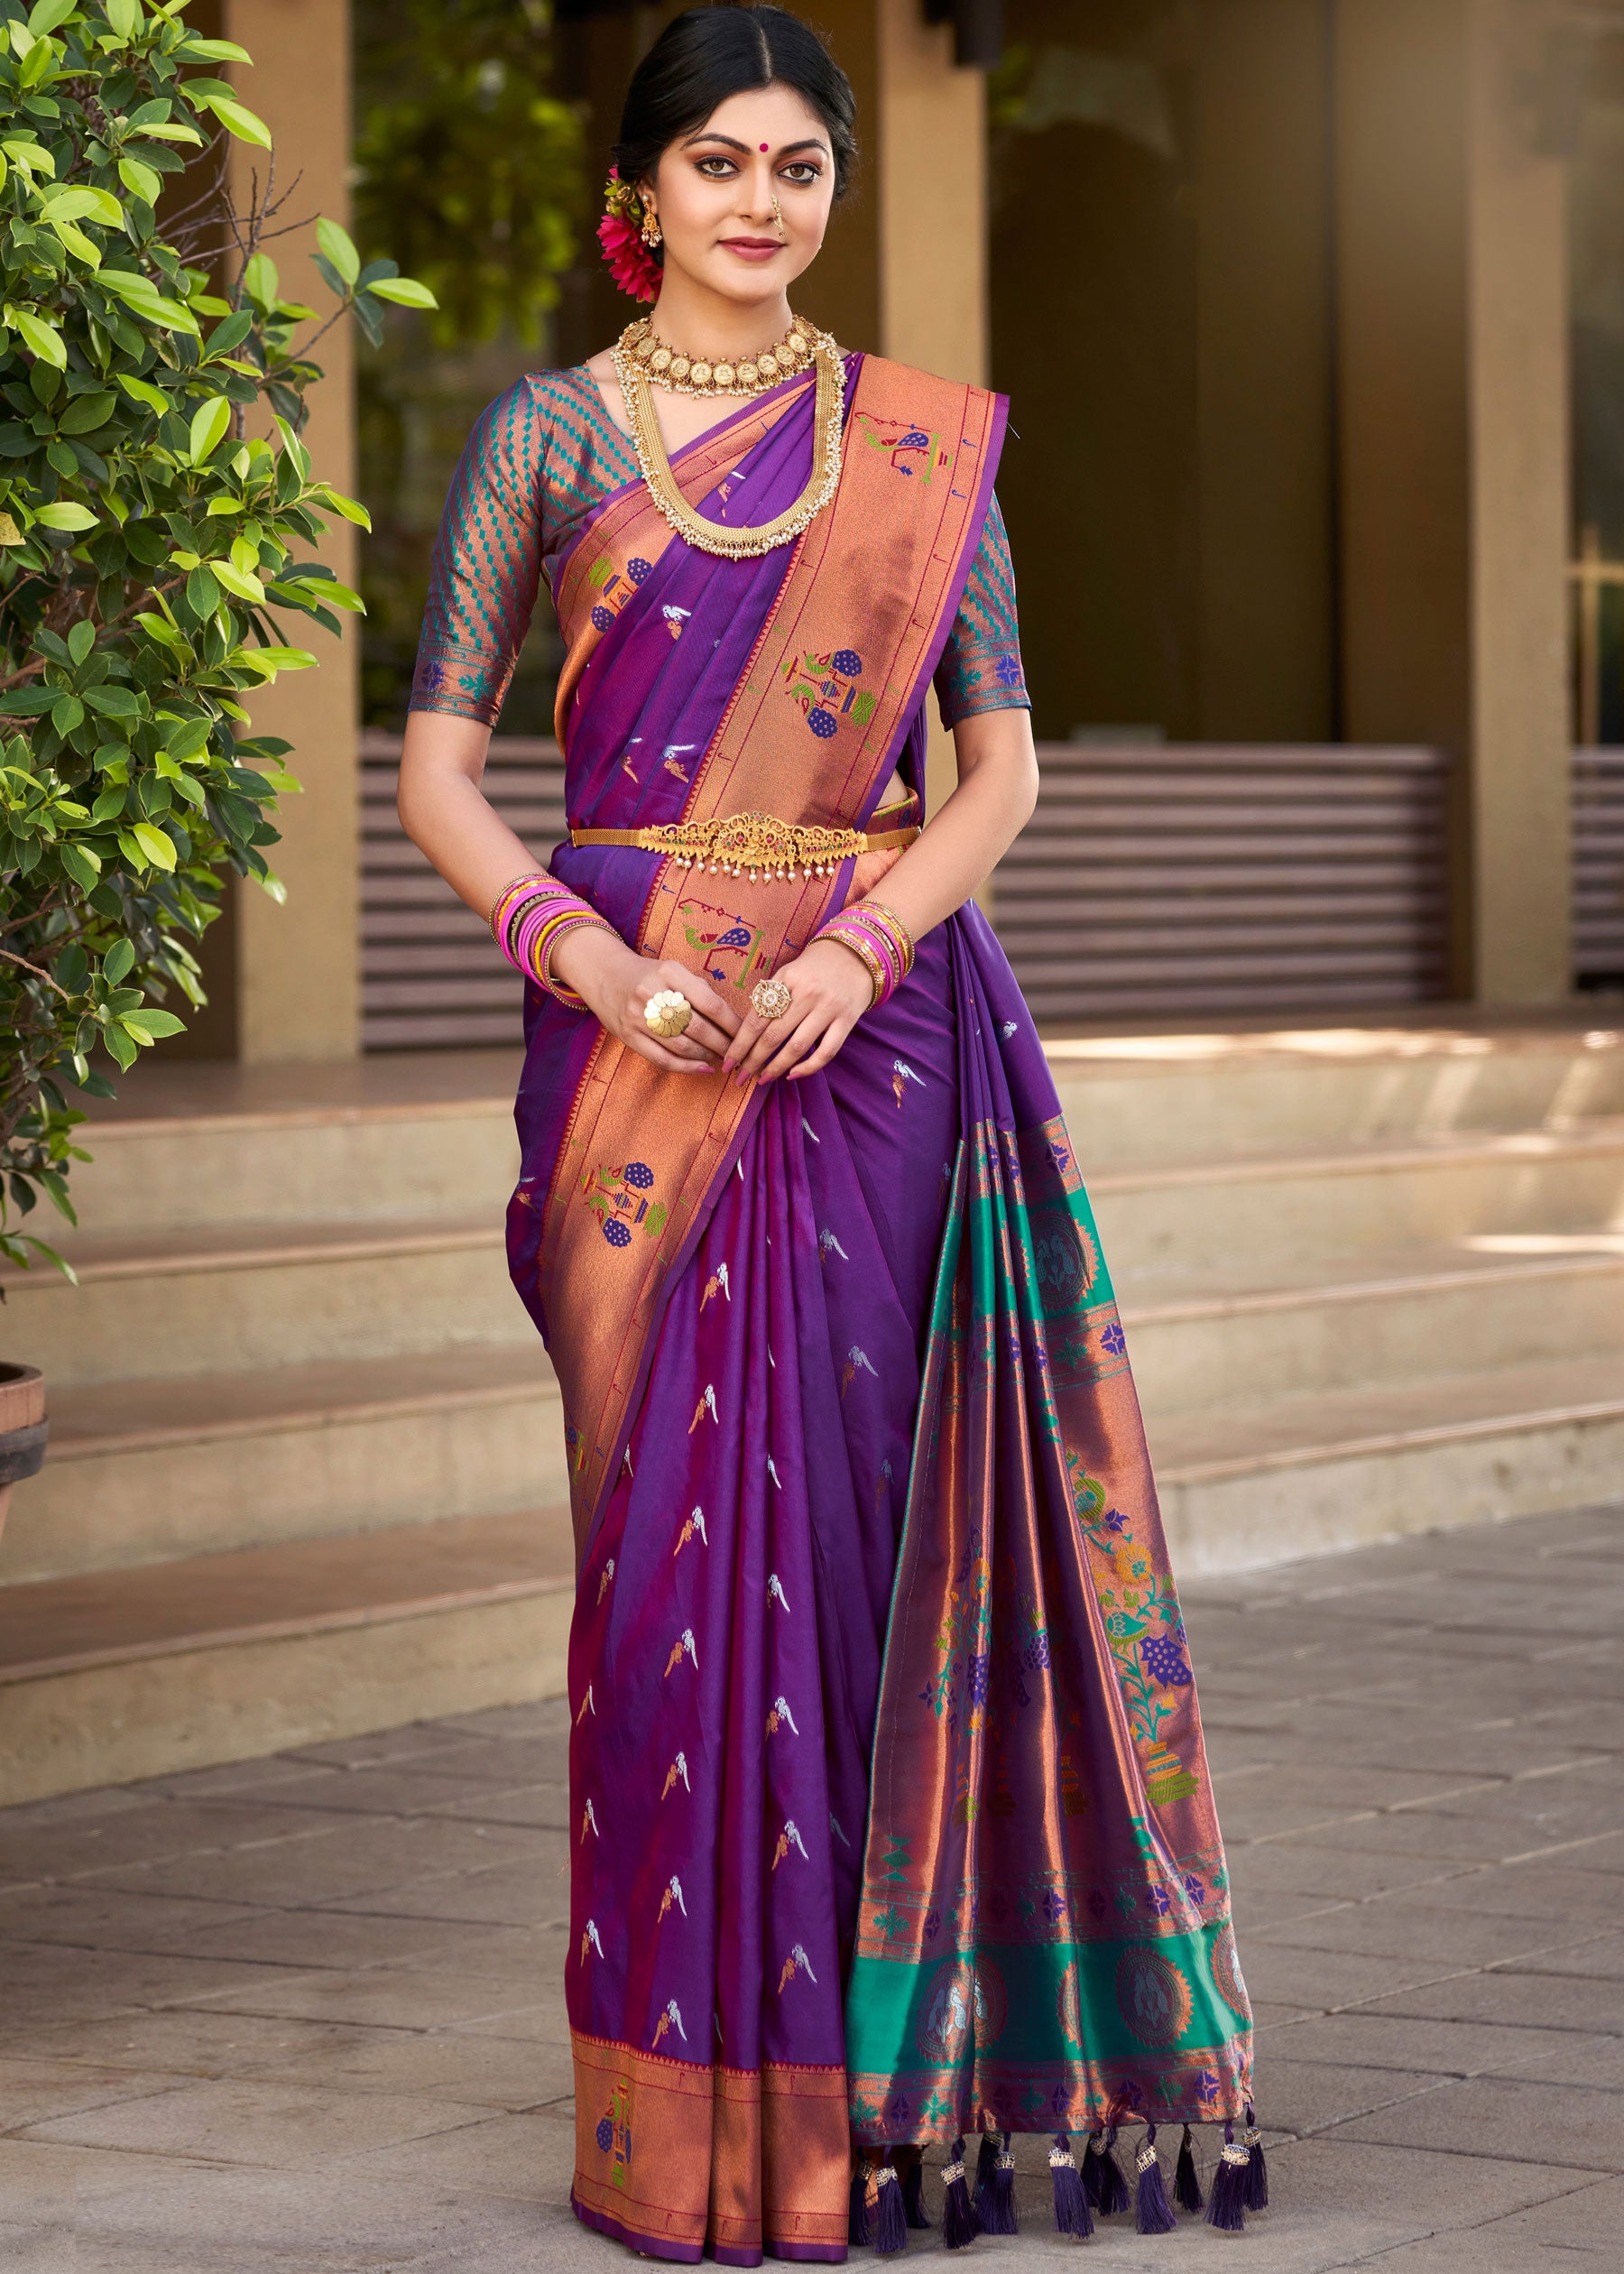 Silk Saree with blouse in Purple colour 5418